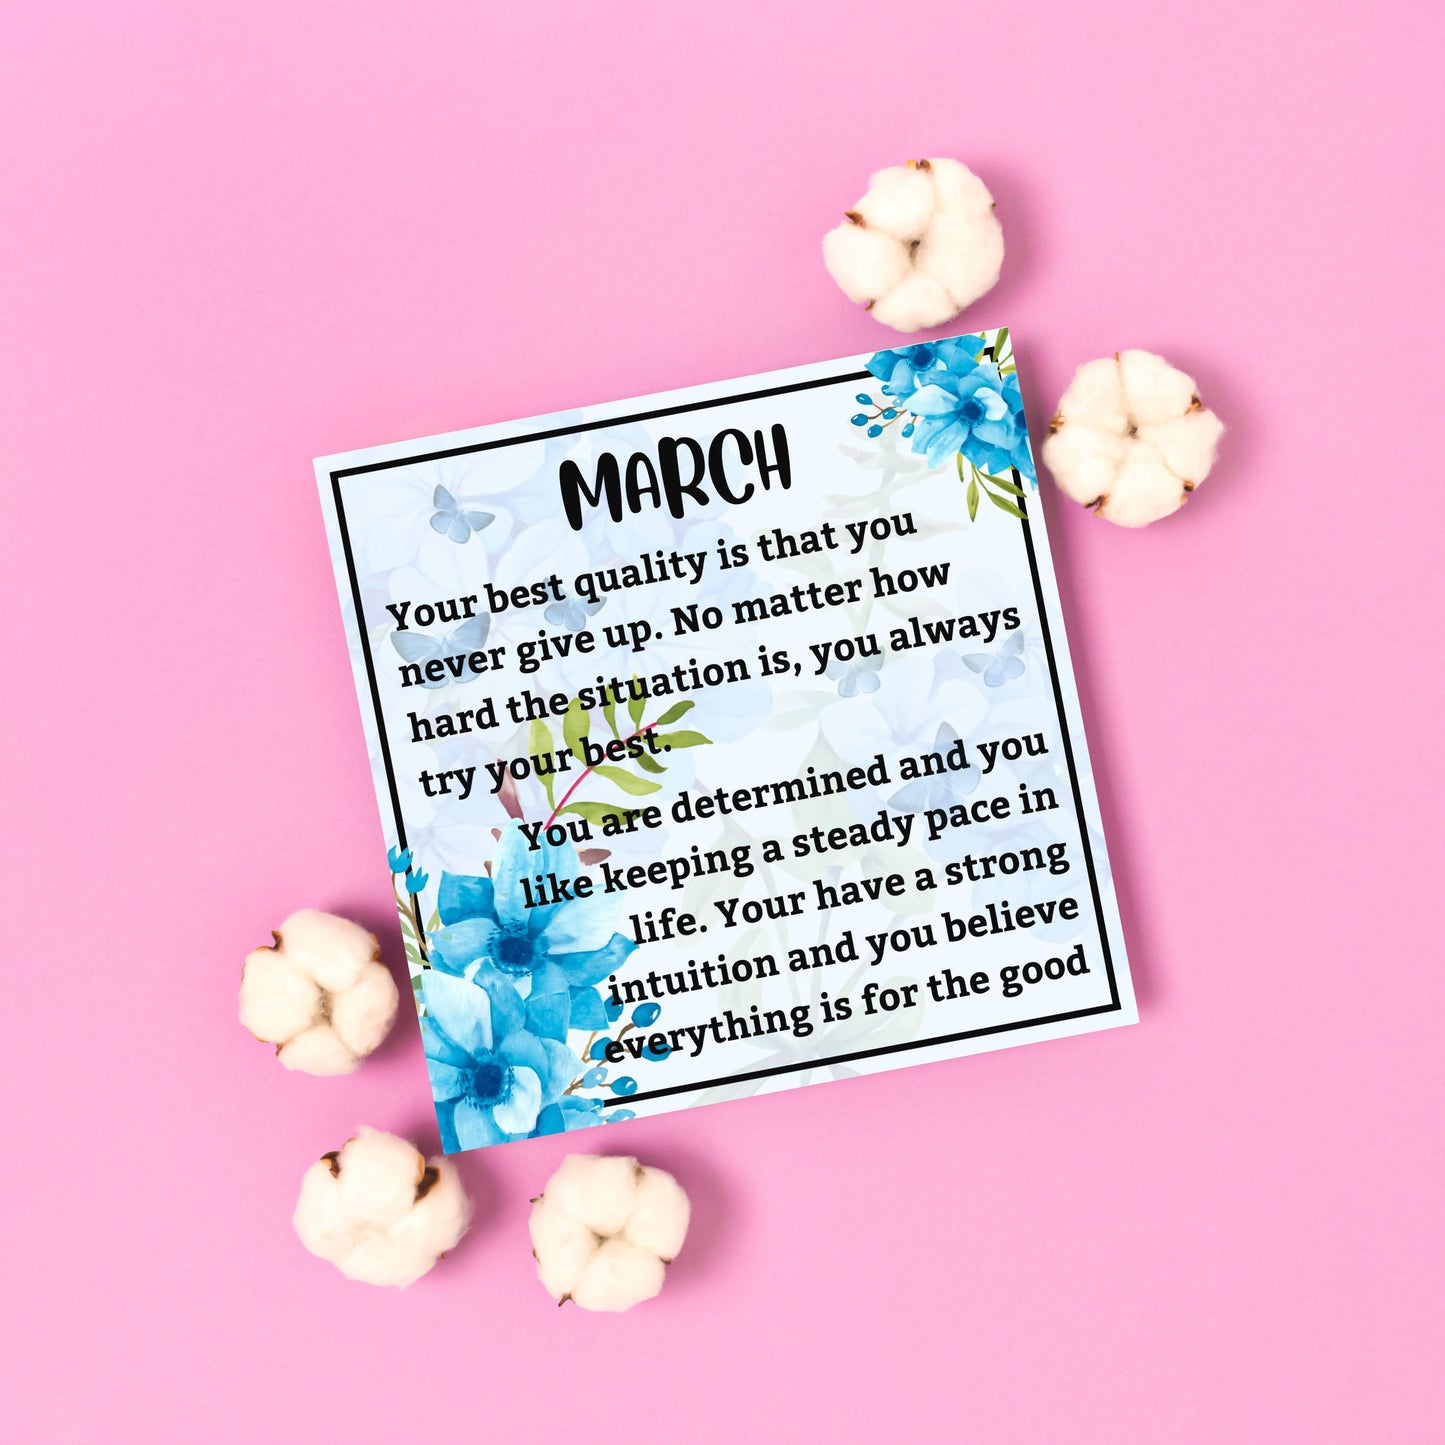 March Birthstone Cute Earrings for Christmas 2023 | March Birthstone Cute Earrings - undefined | Aquamarine Birthstone Earrings, birthstone earring, birthstone jewelry, Creative Cute Earrings | From Hunny Life | hunnylife.com